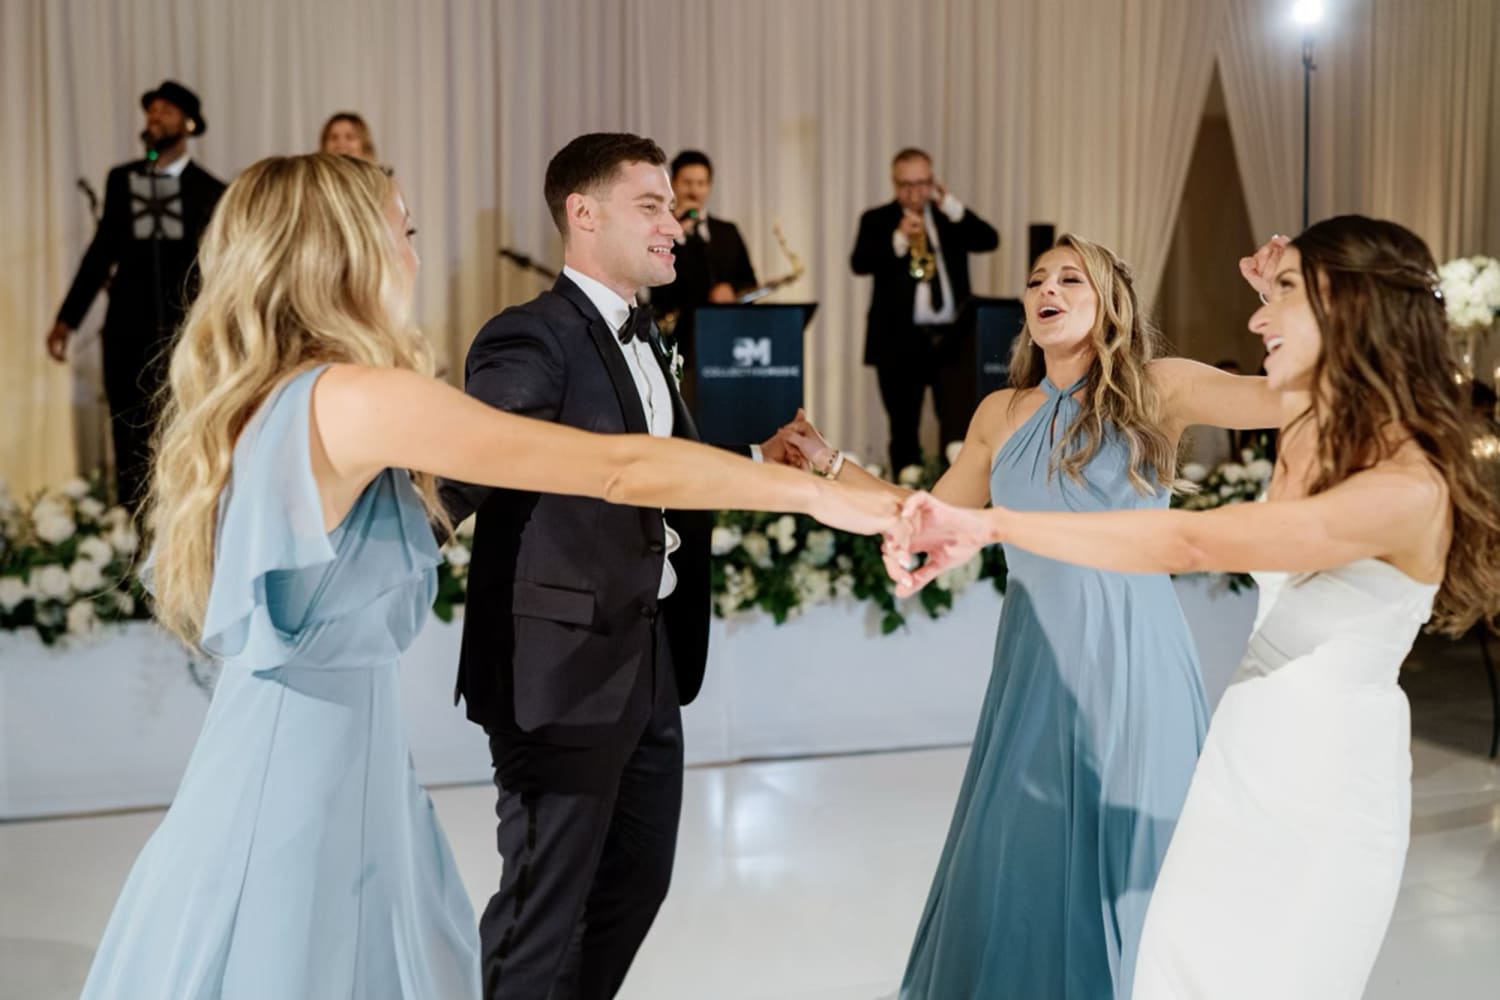 After their mom died, 2 sisters stepped in to dance with their brother on his wedding day